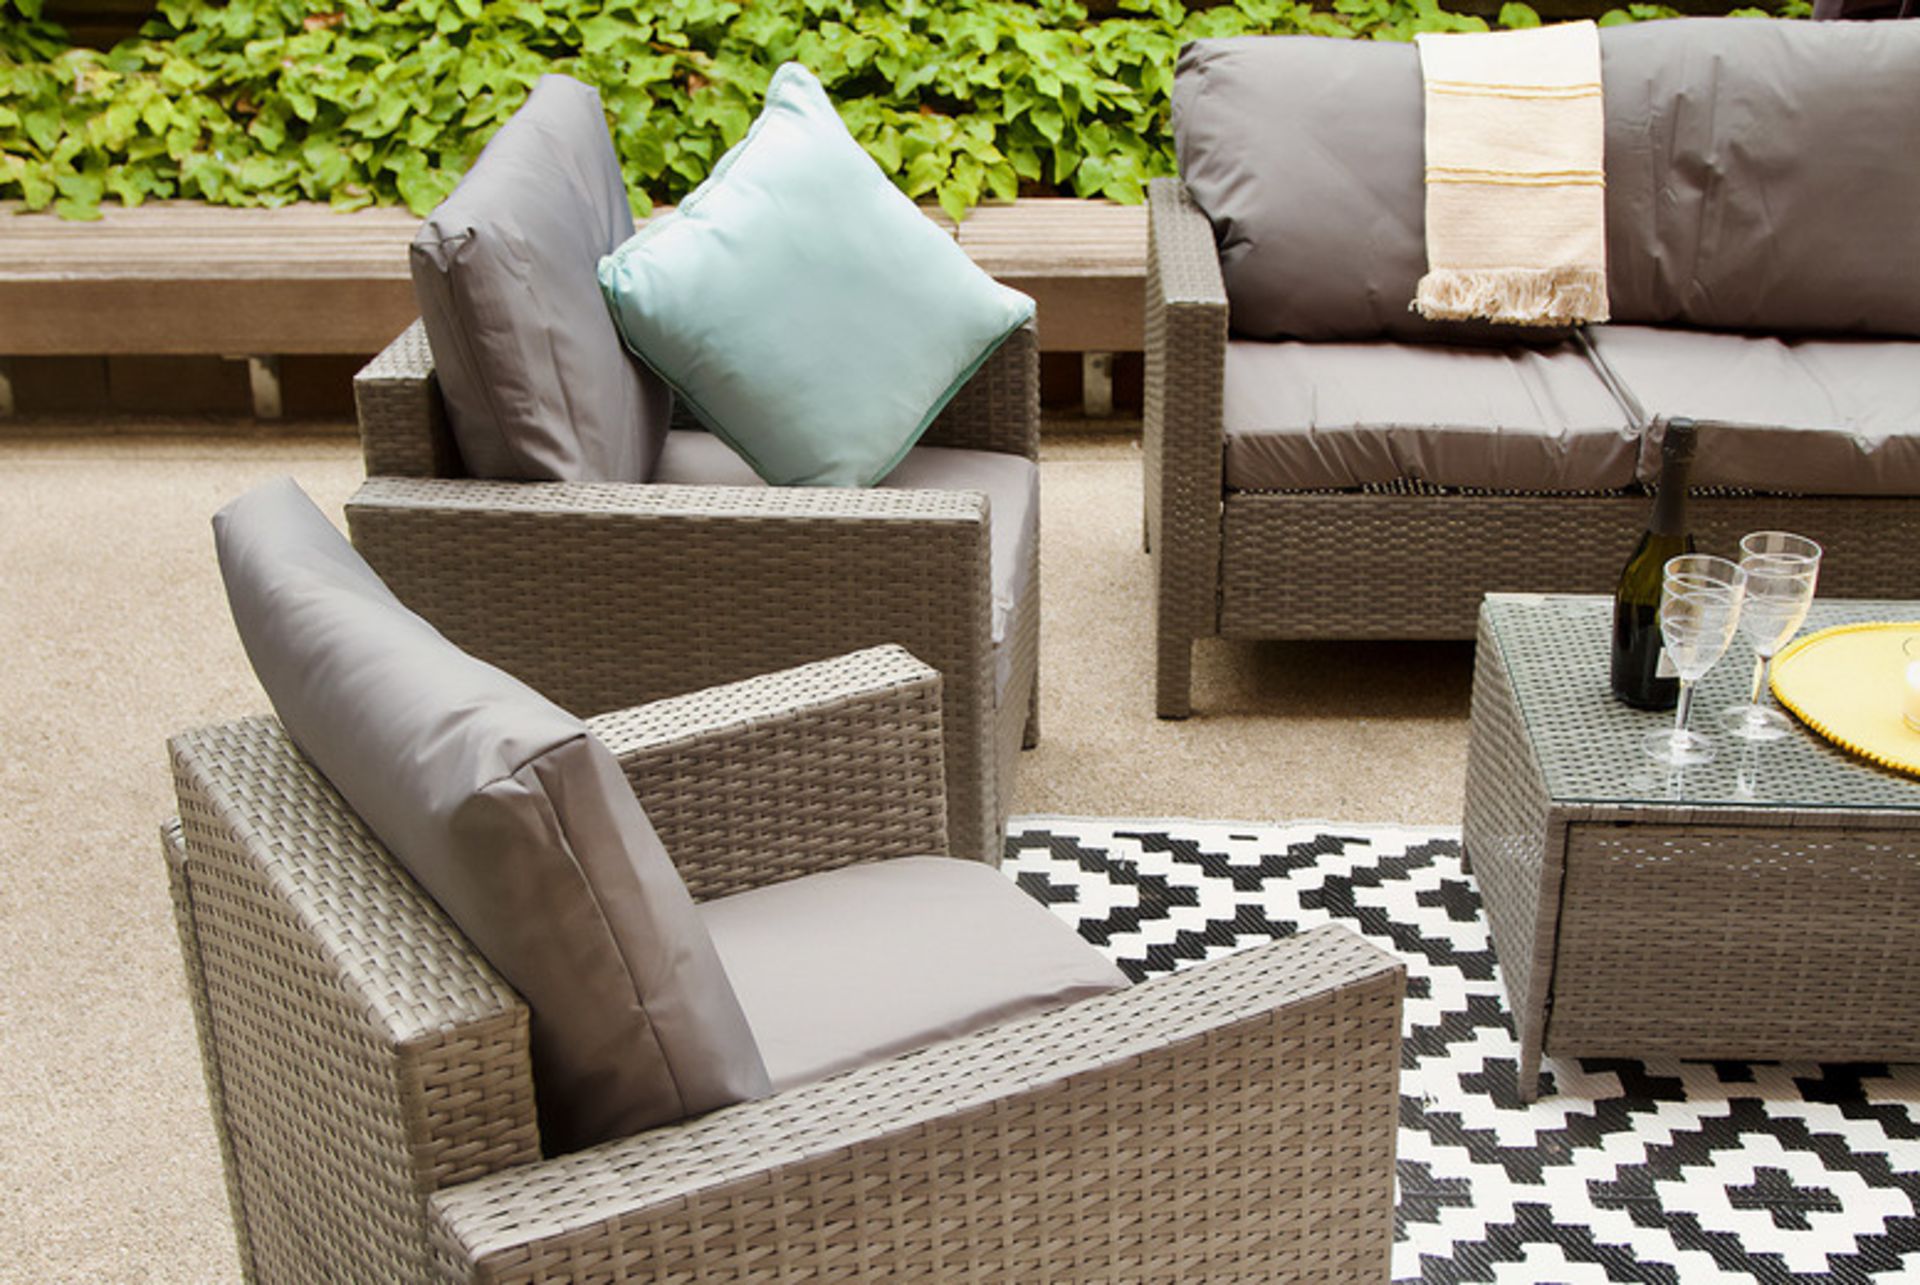 FREE DELIVERY - 8-SEATER RATTAN CHAIR & SOFA GARDEN FURNITURE SET - GREY - Image 4 of 5